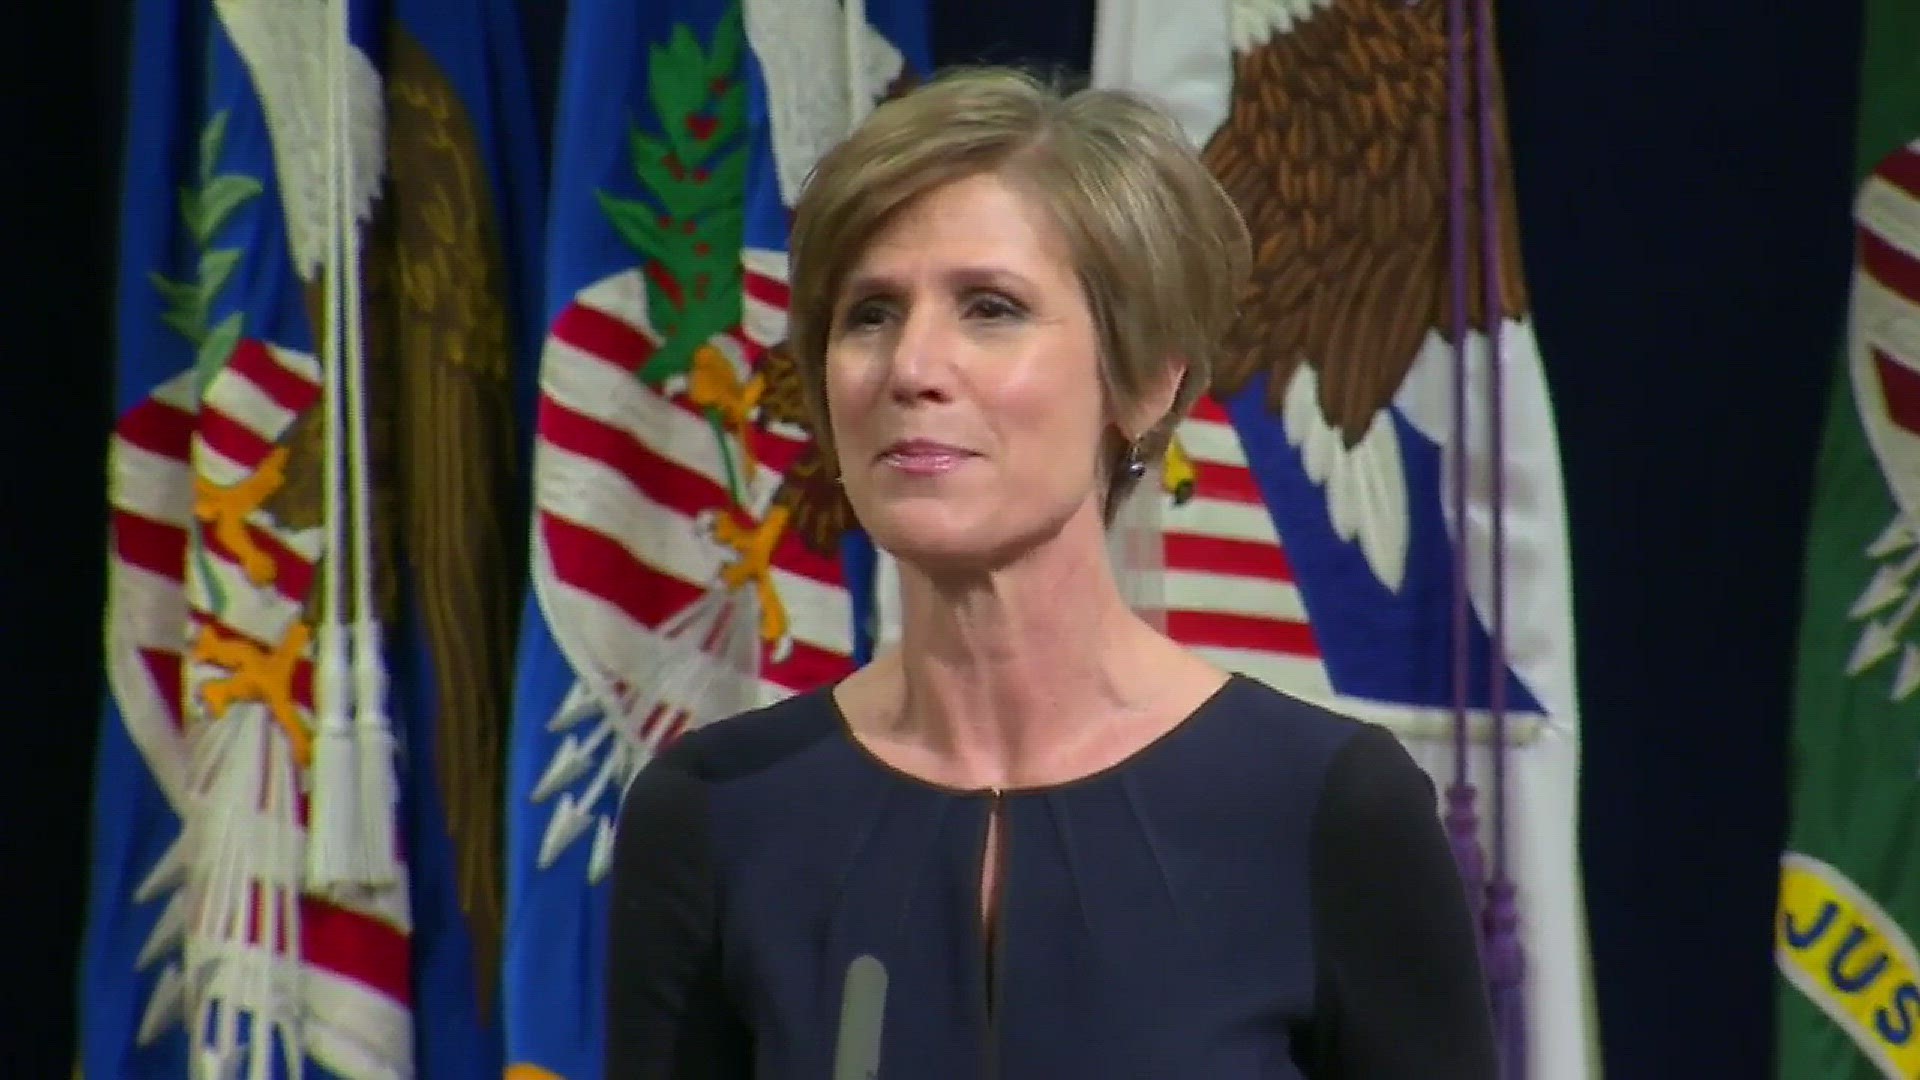 Former Deputy Attorney General Sally Yates says she will offer a public account of former Trump security adviser Michael Flynn's communication with Russia. ABC News